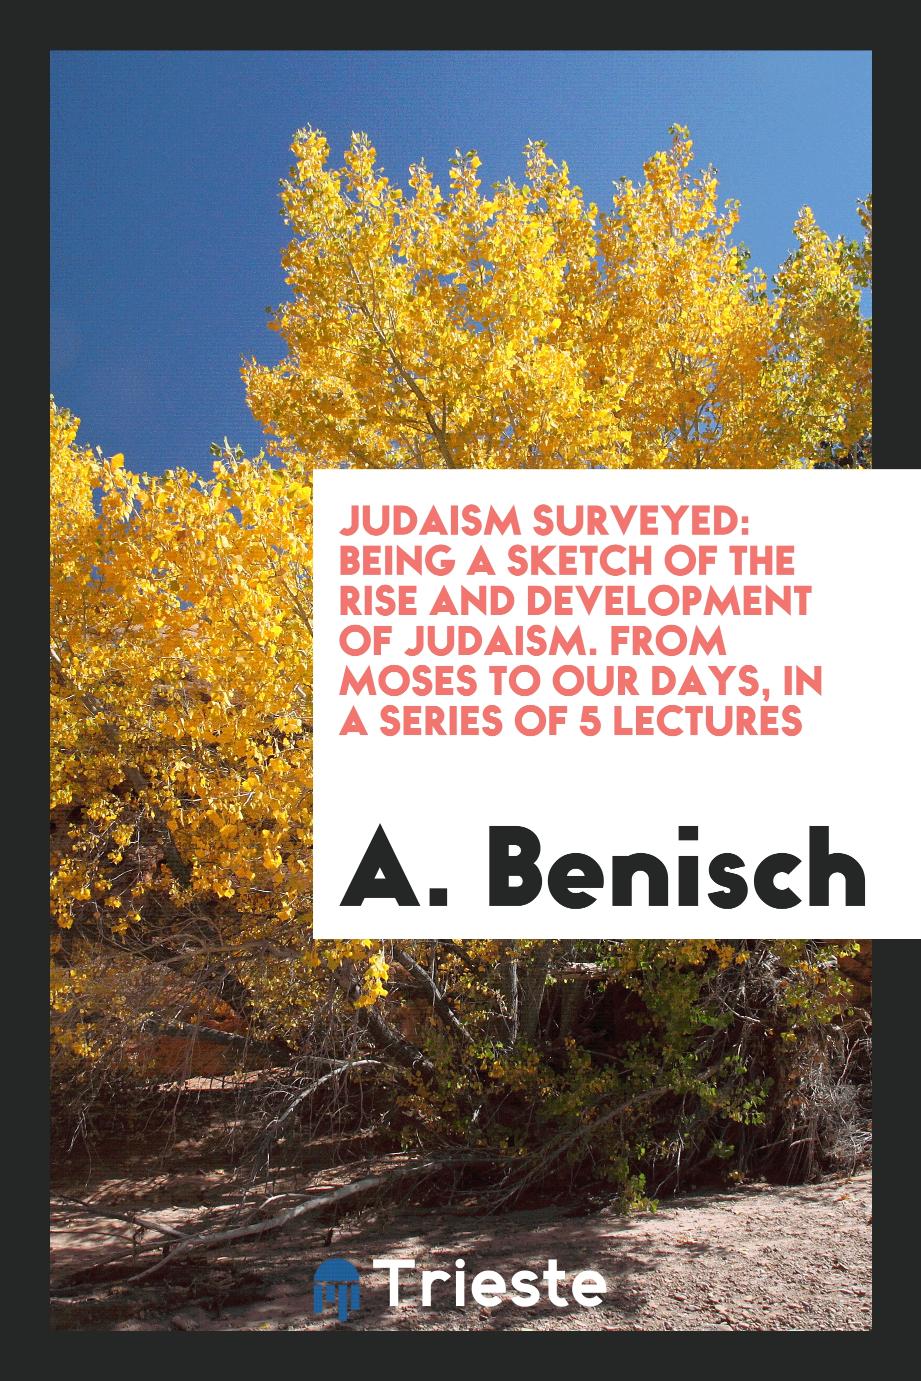 Judaism Surveyed: Being a Sketch of the Rise and Development of Judaism. From Moses to Our Days, in a Series of 5 Lectures